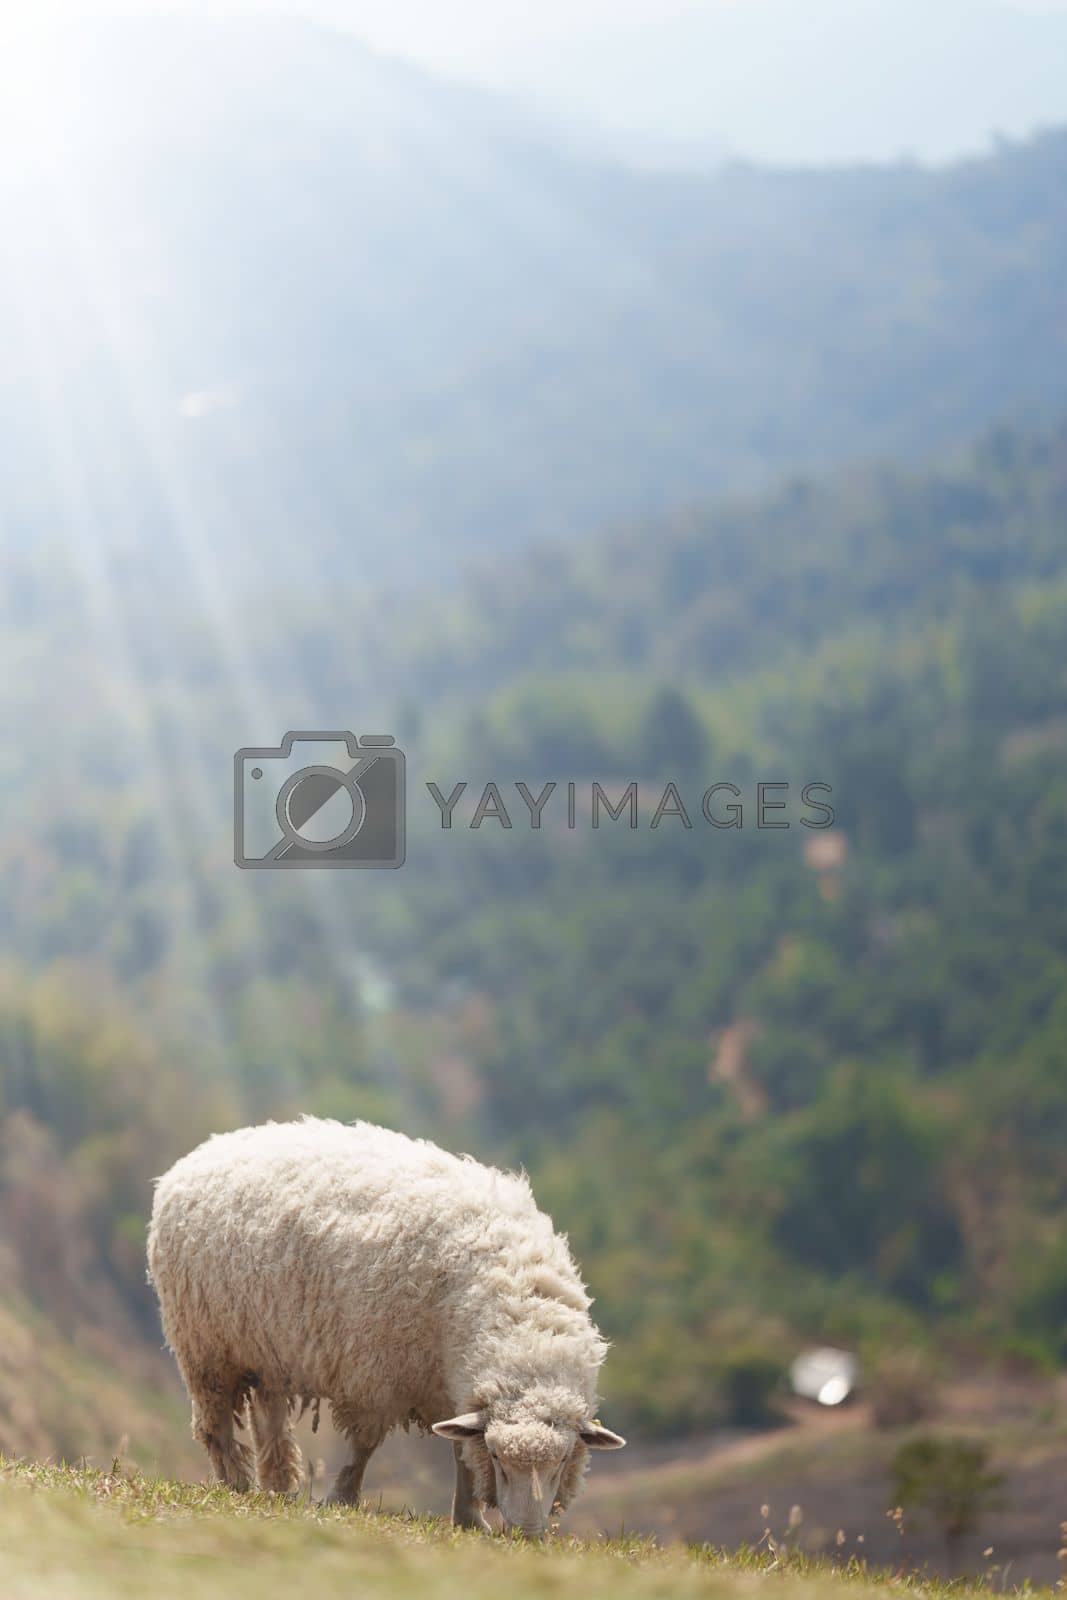 Royalty free image of Sheep in a field with a flock of sheep behind and the sun is shining by itchaznong